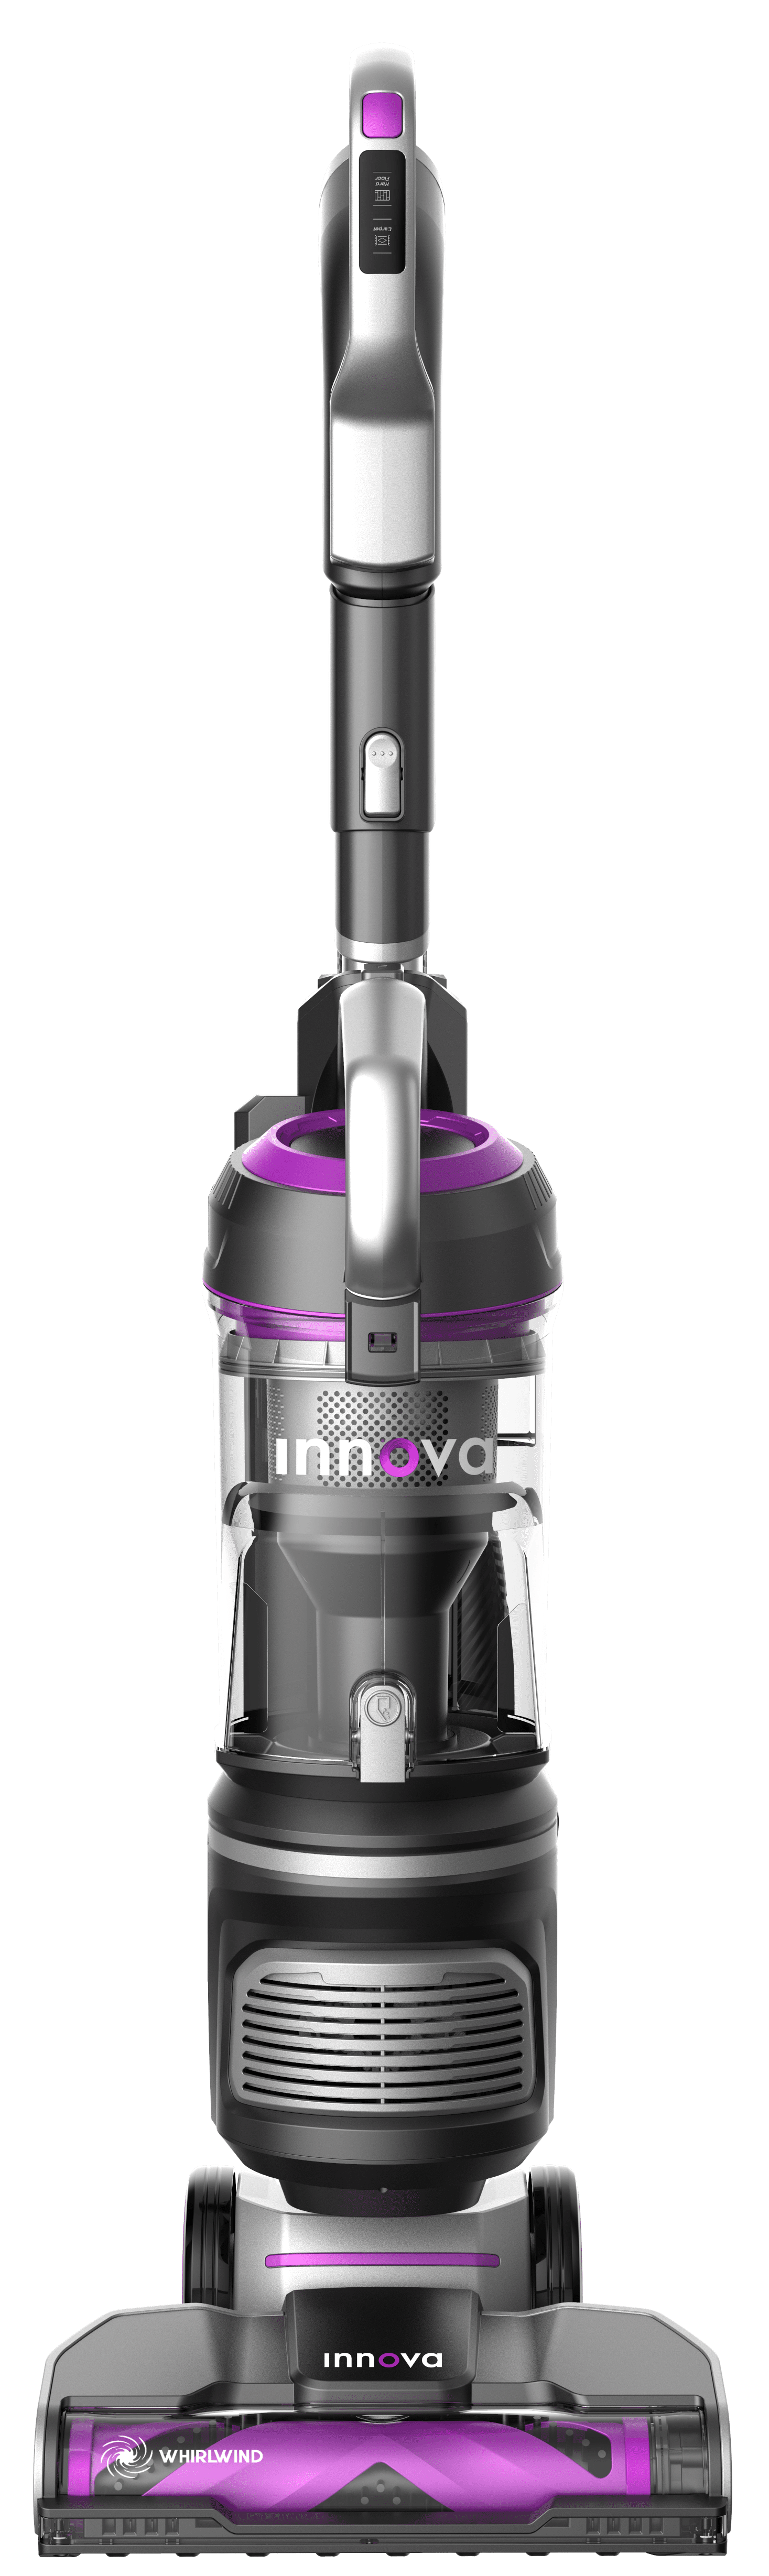 Who should buy the Innova Vacuum Cleaner?